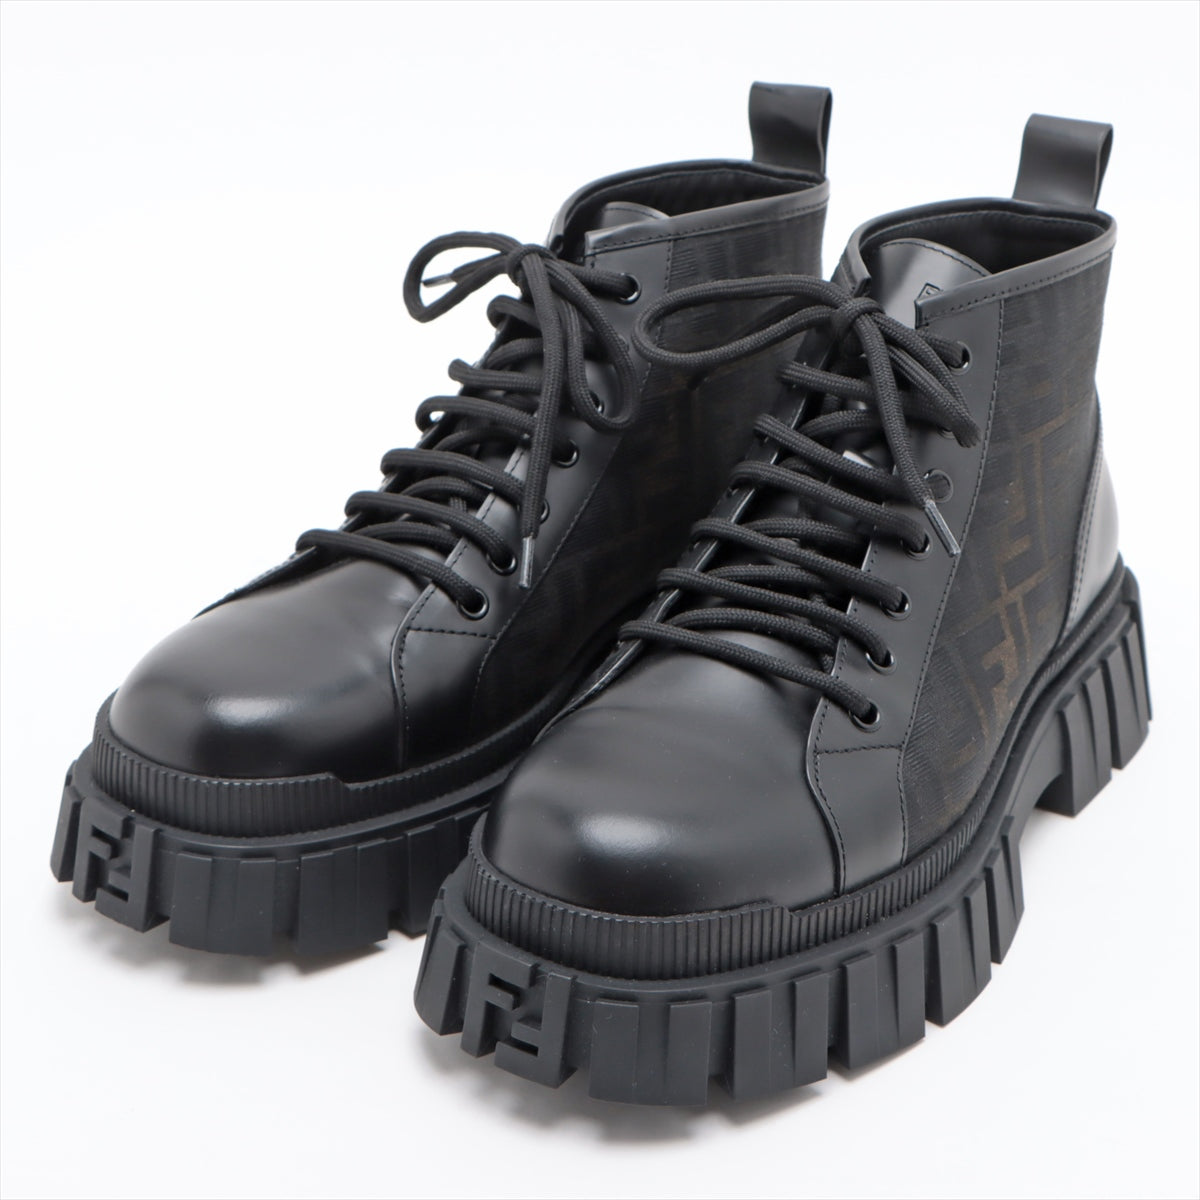 Fendi Canvas & leather Boots 7 Men's Black 7U1641 Force ZUCCa Is there a replacement string